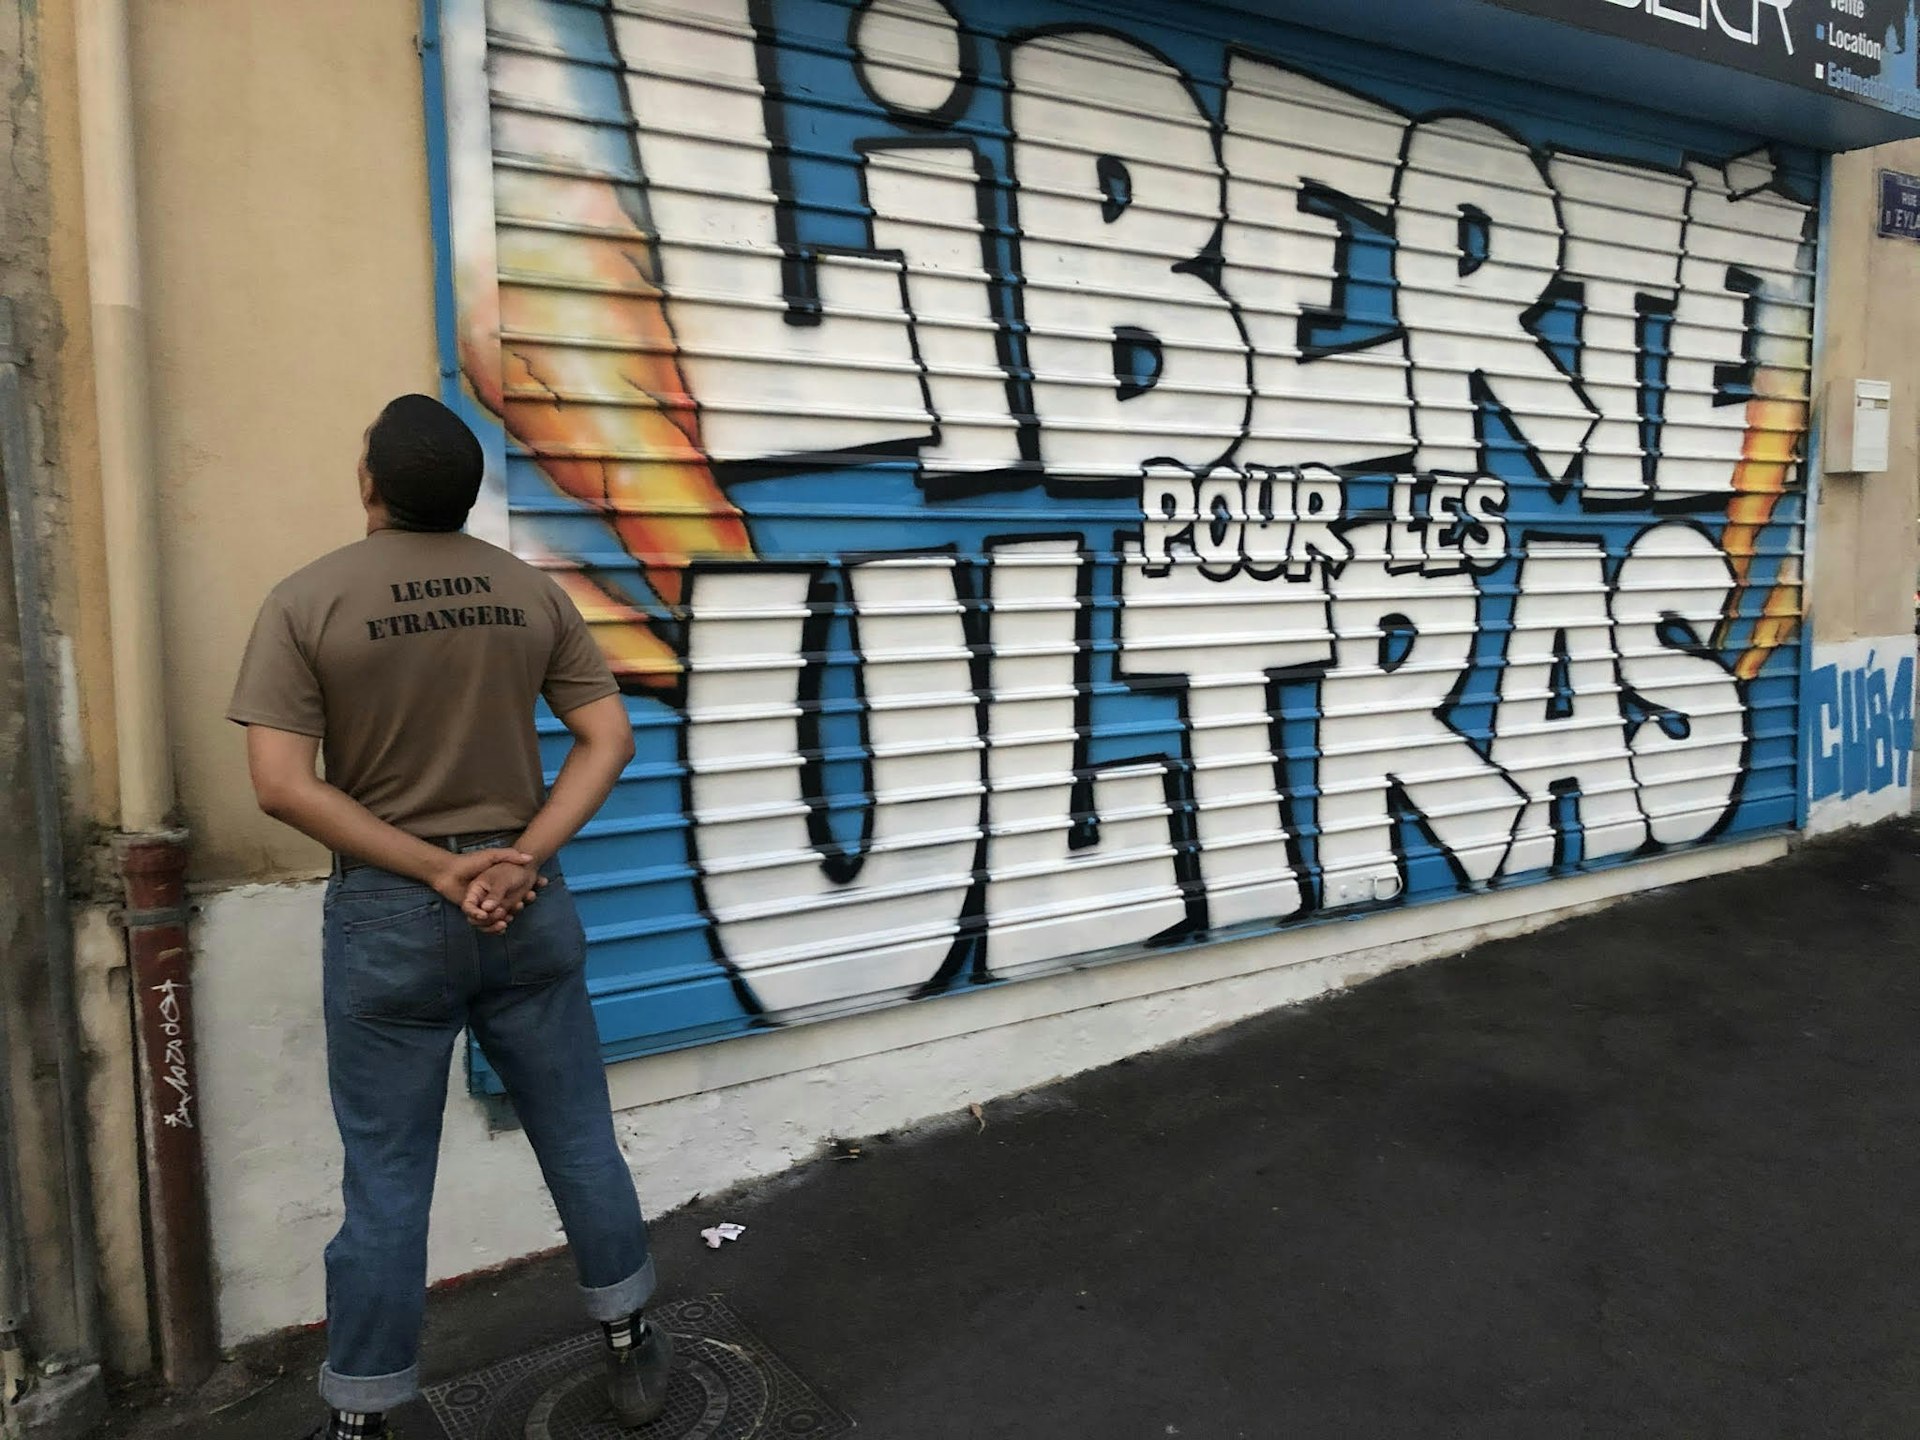 A man standing with his back turned, looking at graffiti that says 